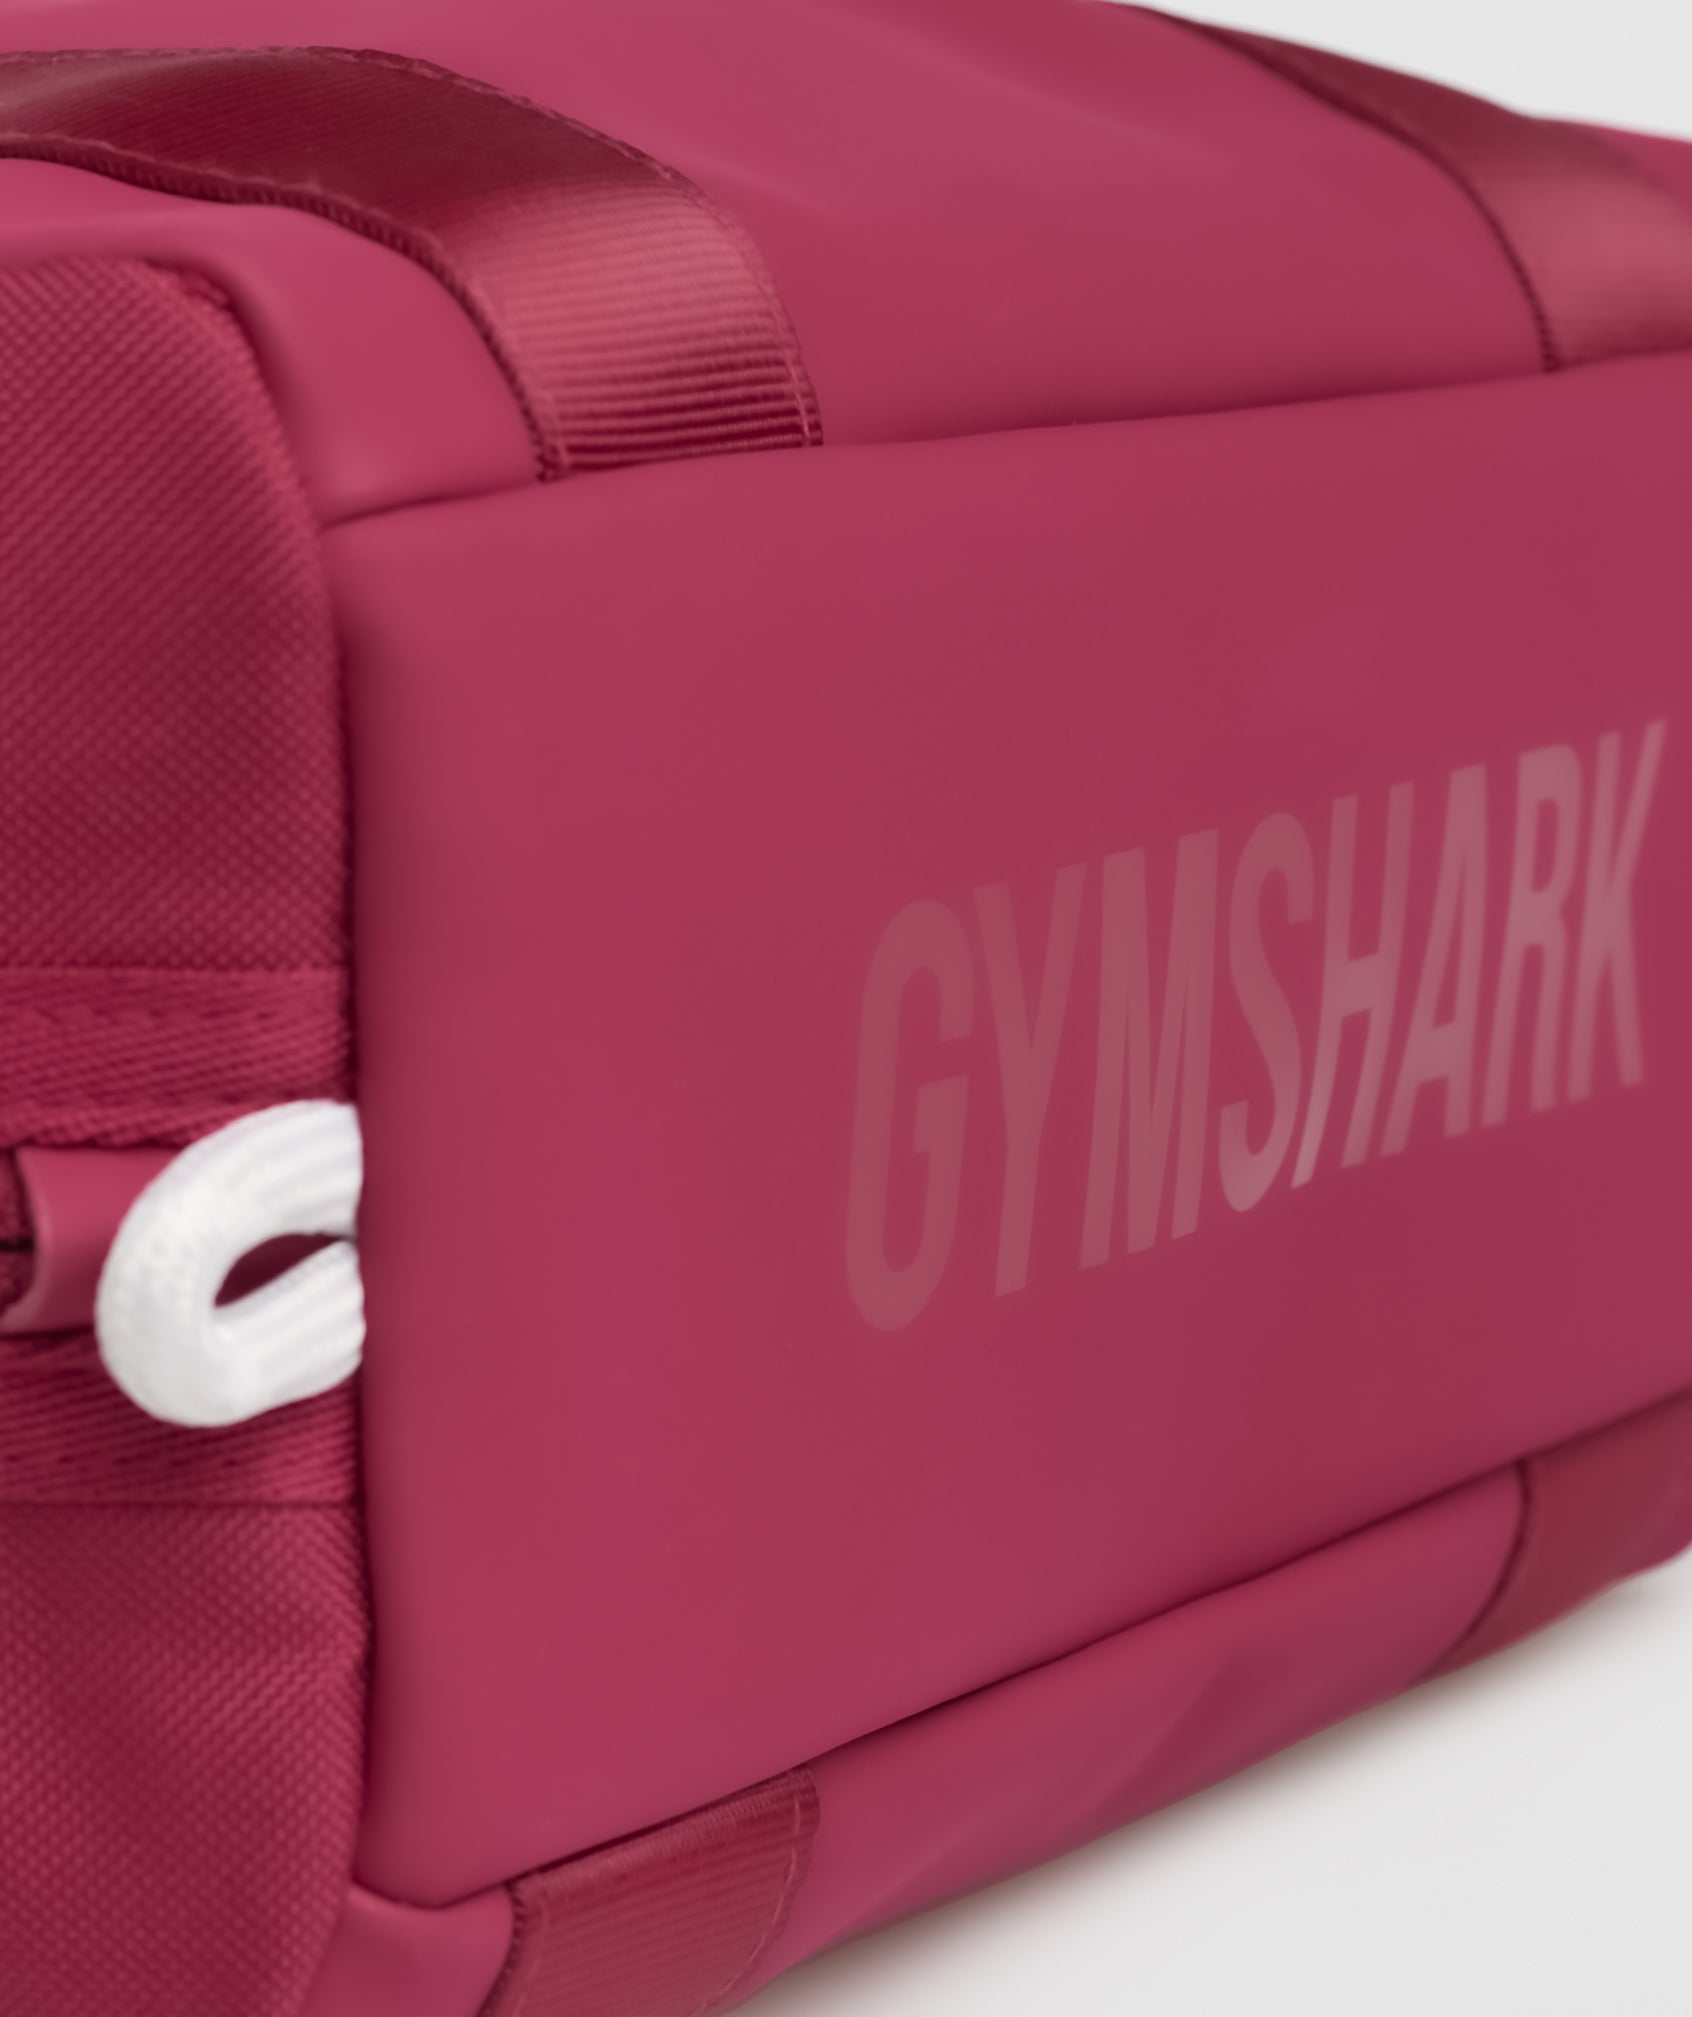 Everyday Mini Gym Bag in Raspberry Pink - view 4